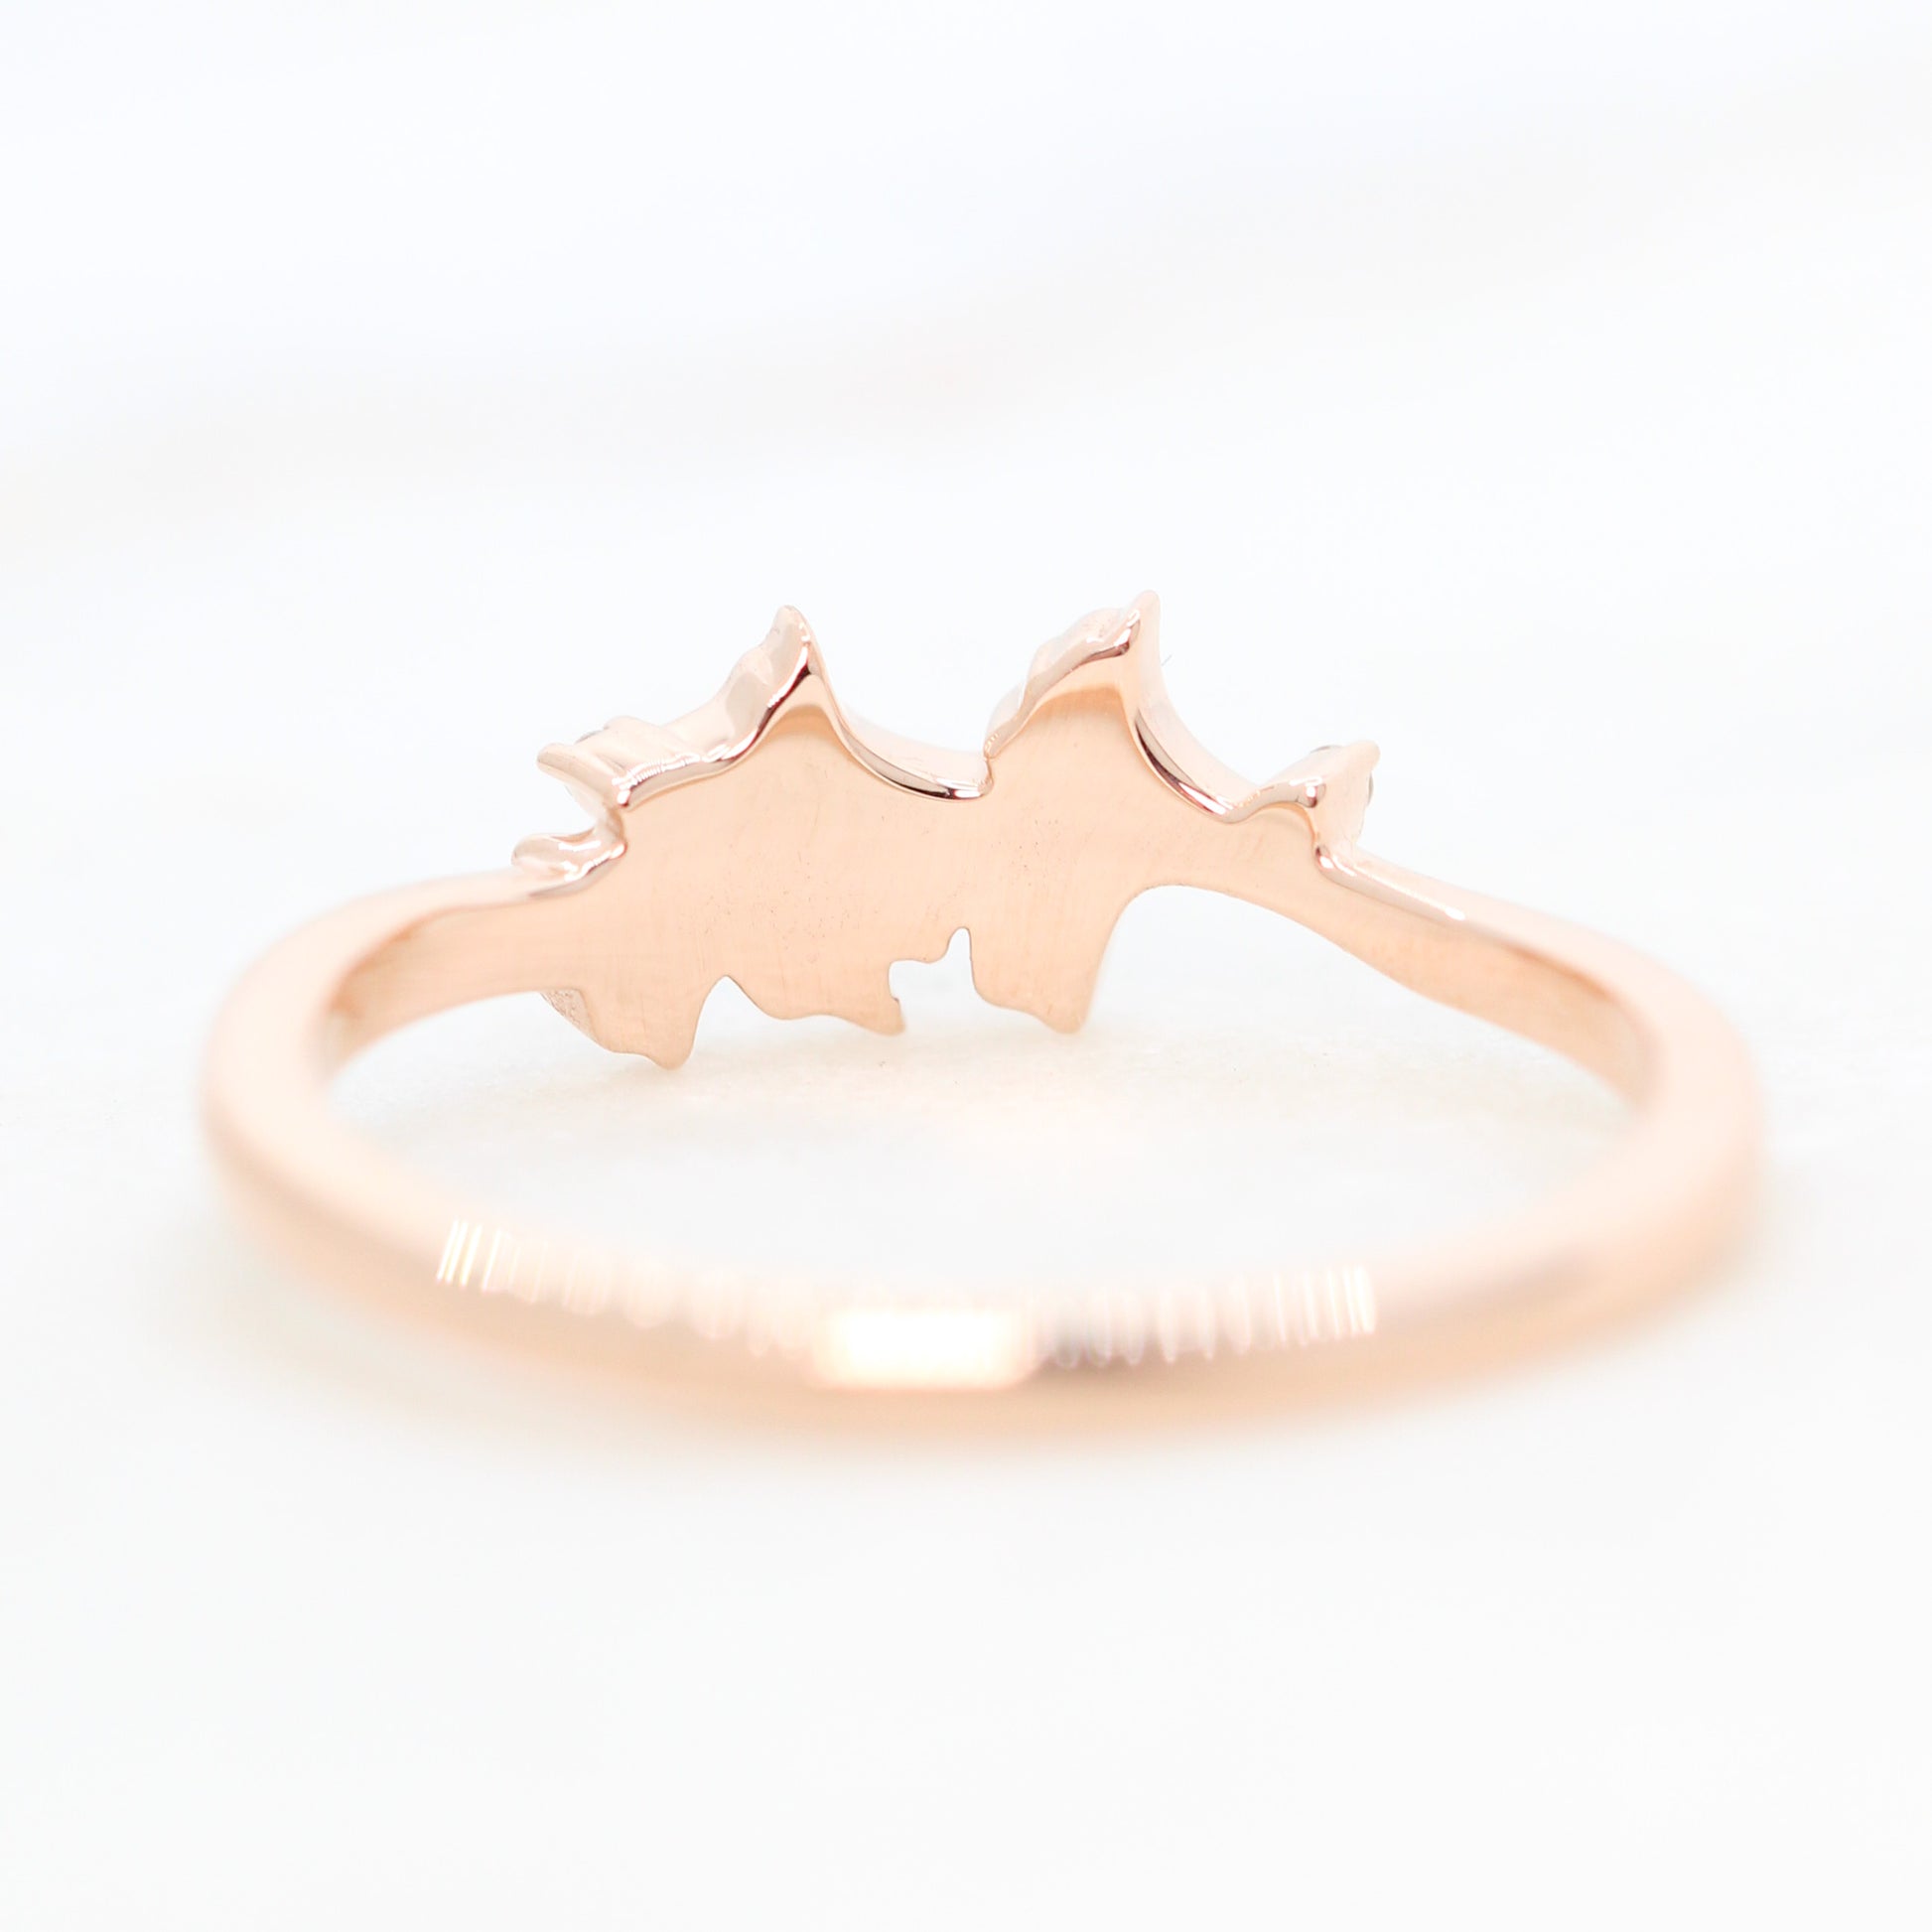 Gingko Leaf Ring with Diamond Accents - Made to Order, Choose Your Gold Tone - Midwinter Co. Alternative Bridal Rings and Modern Fine Jewelry